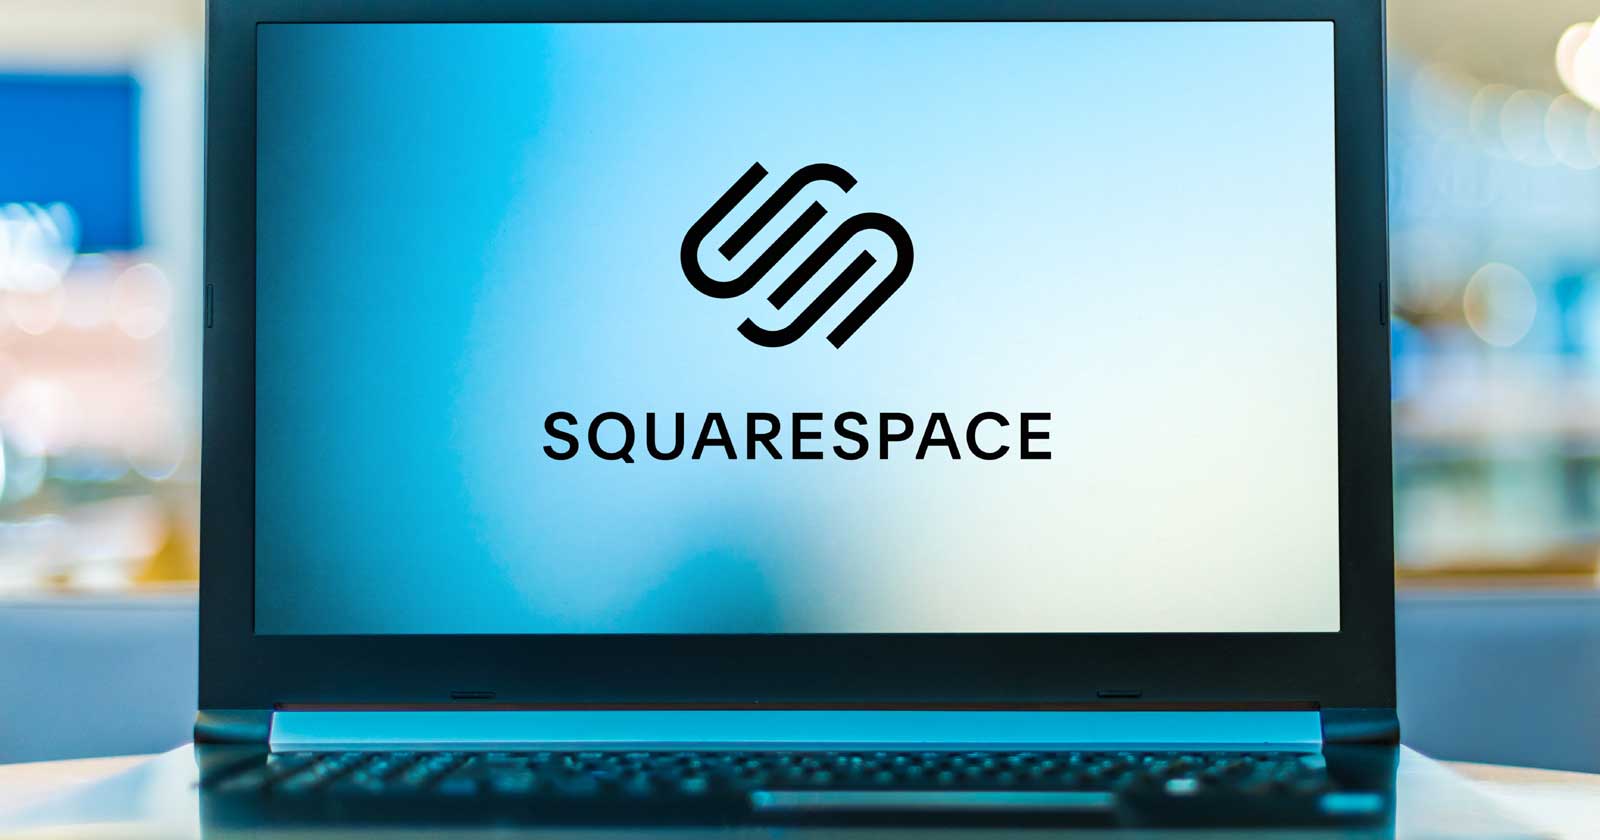 Squarespace Video Hosting and Monetization